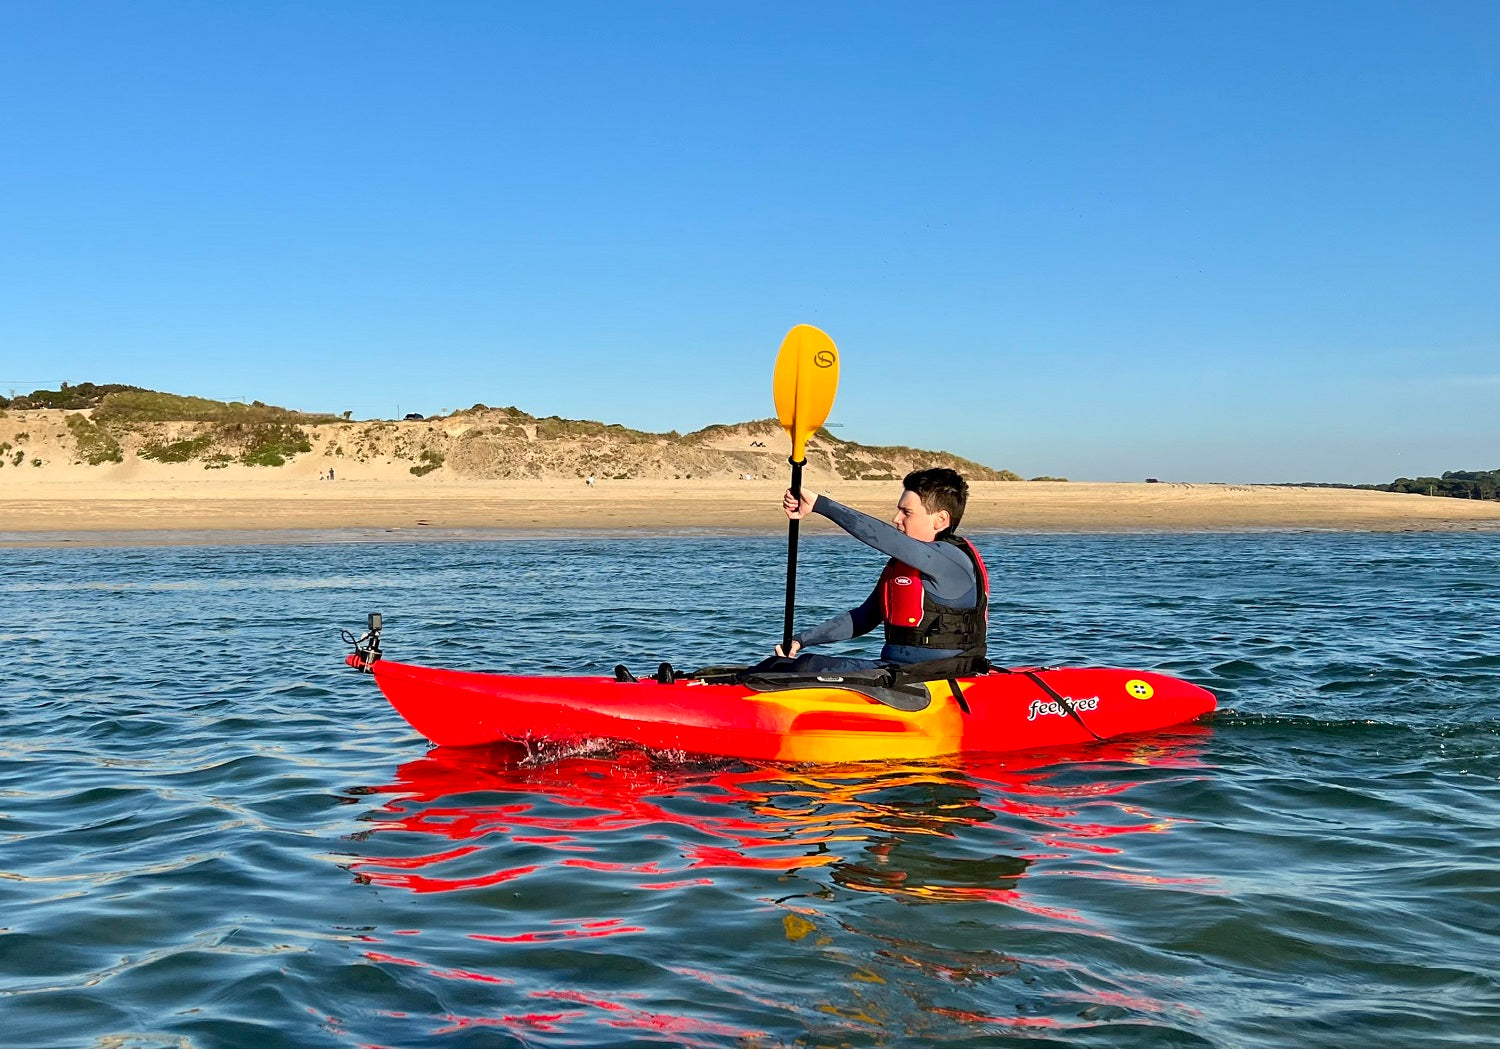 A guide to choosing a buoyancy aid for kayaking